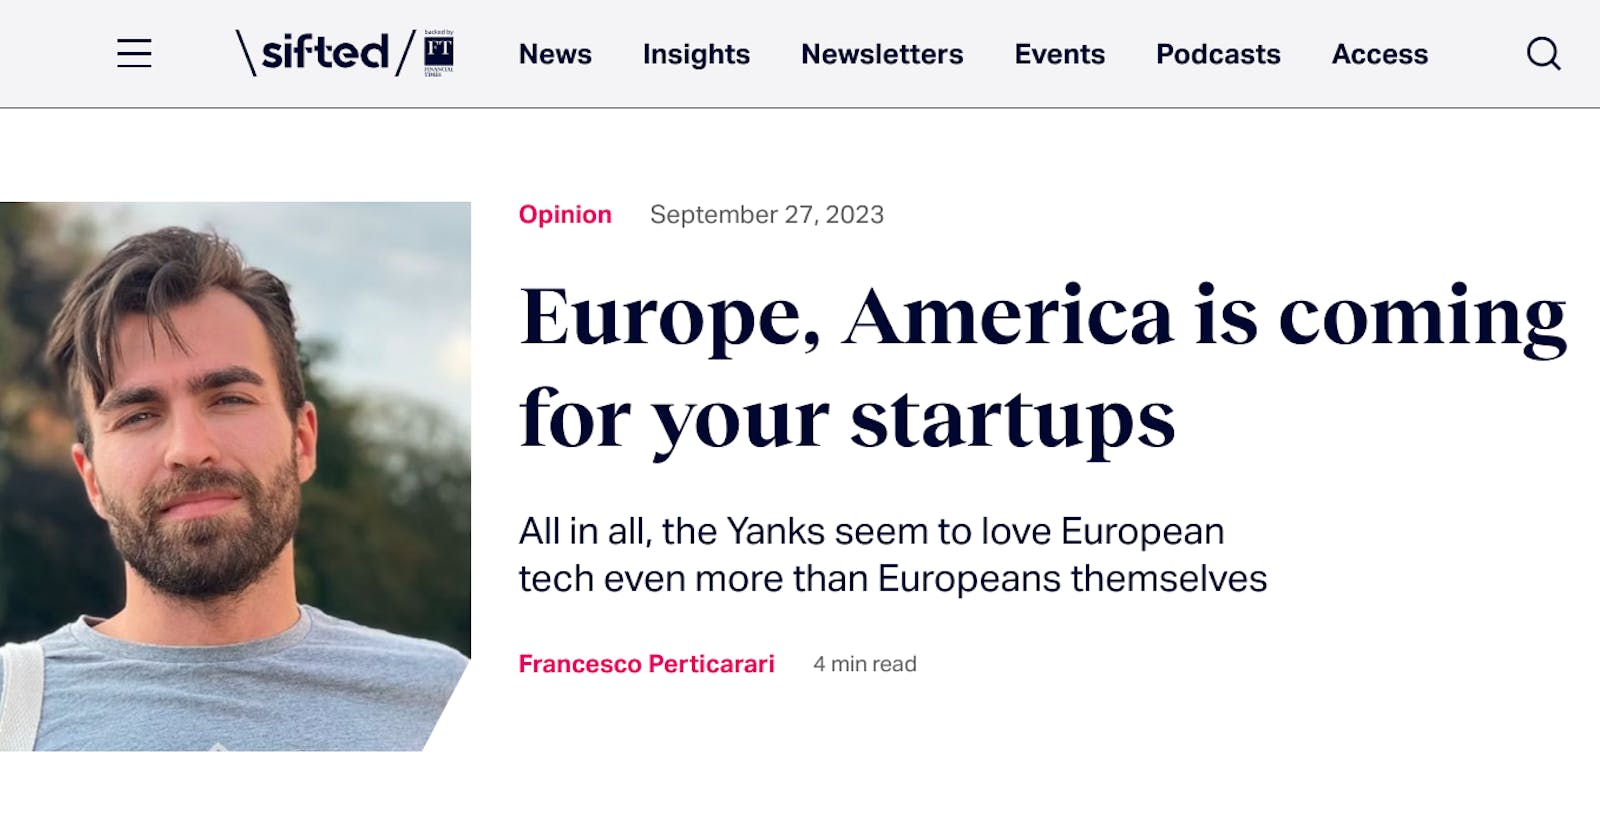 Europe, America is coming for your startups